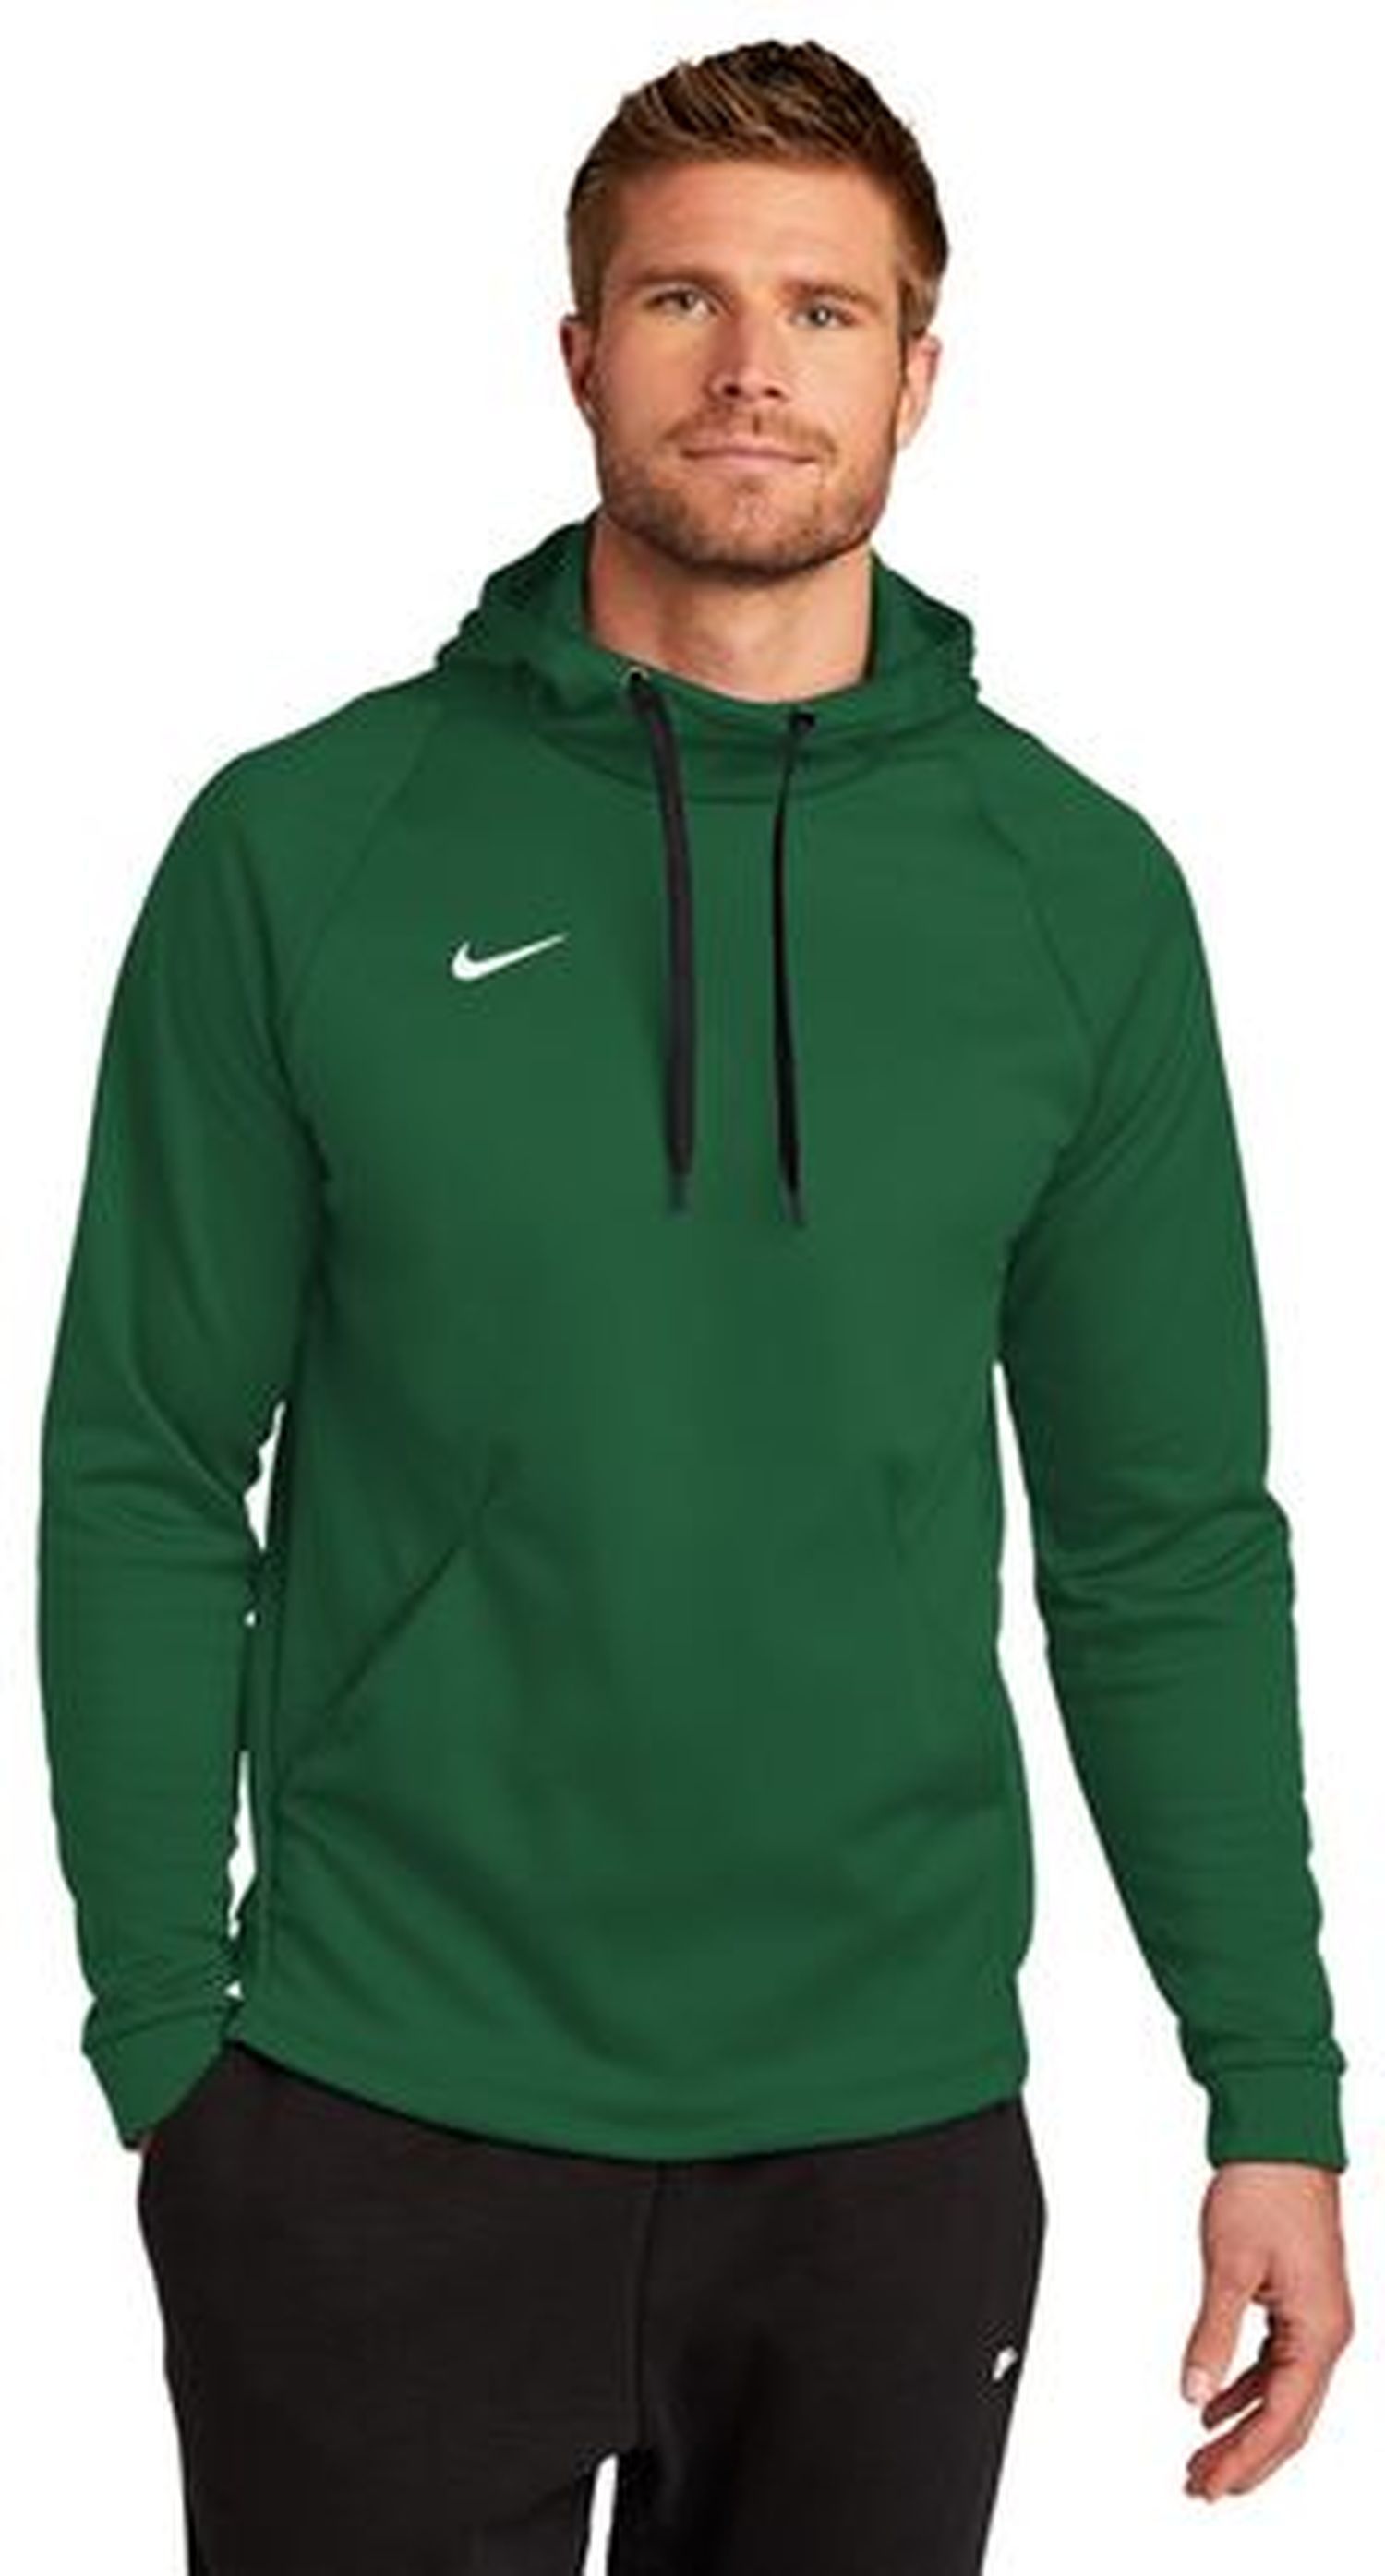 Nike Therma-FIT Adult Unisex 7.3-Ounce 100% Polyester Pullover Fleece Hoodie Sweatshirt